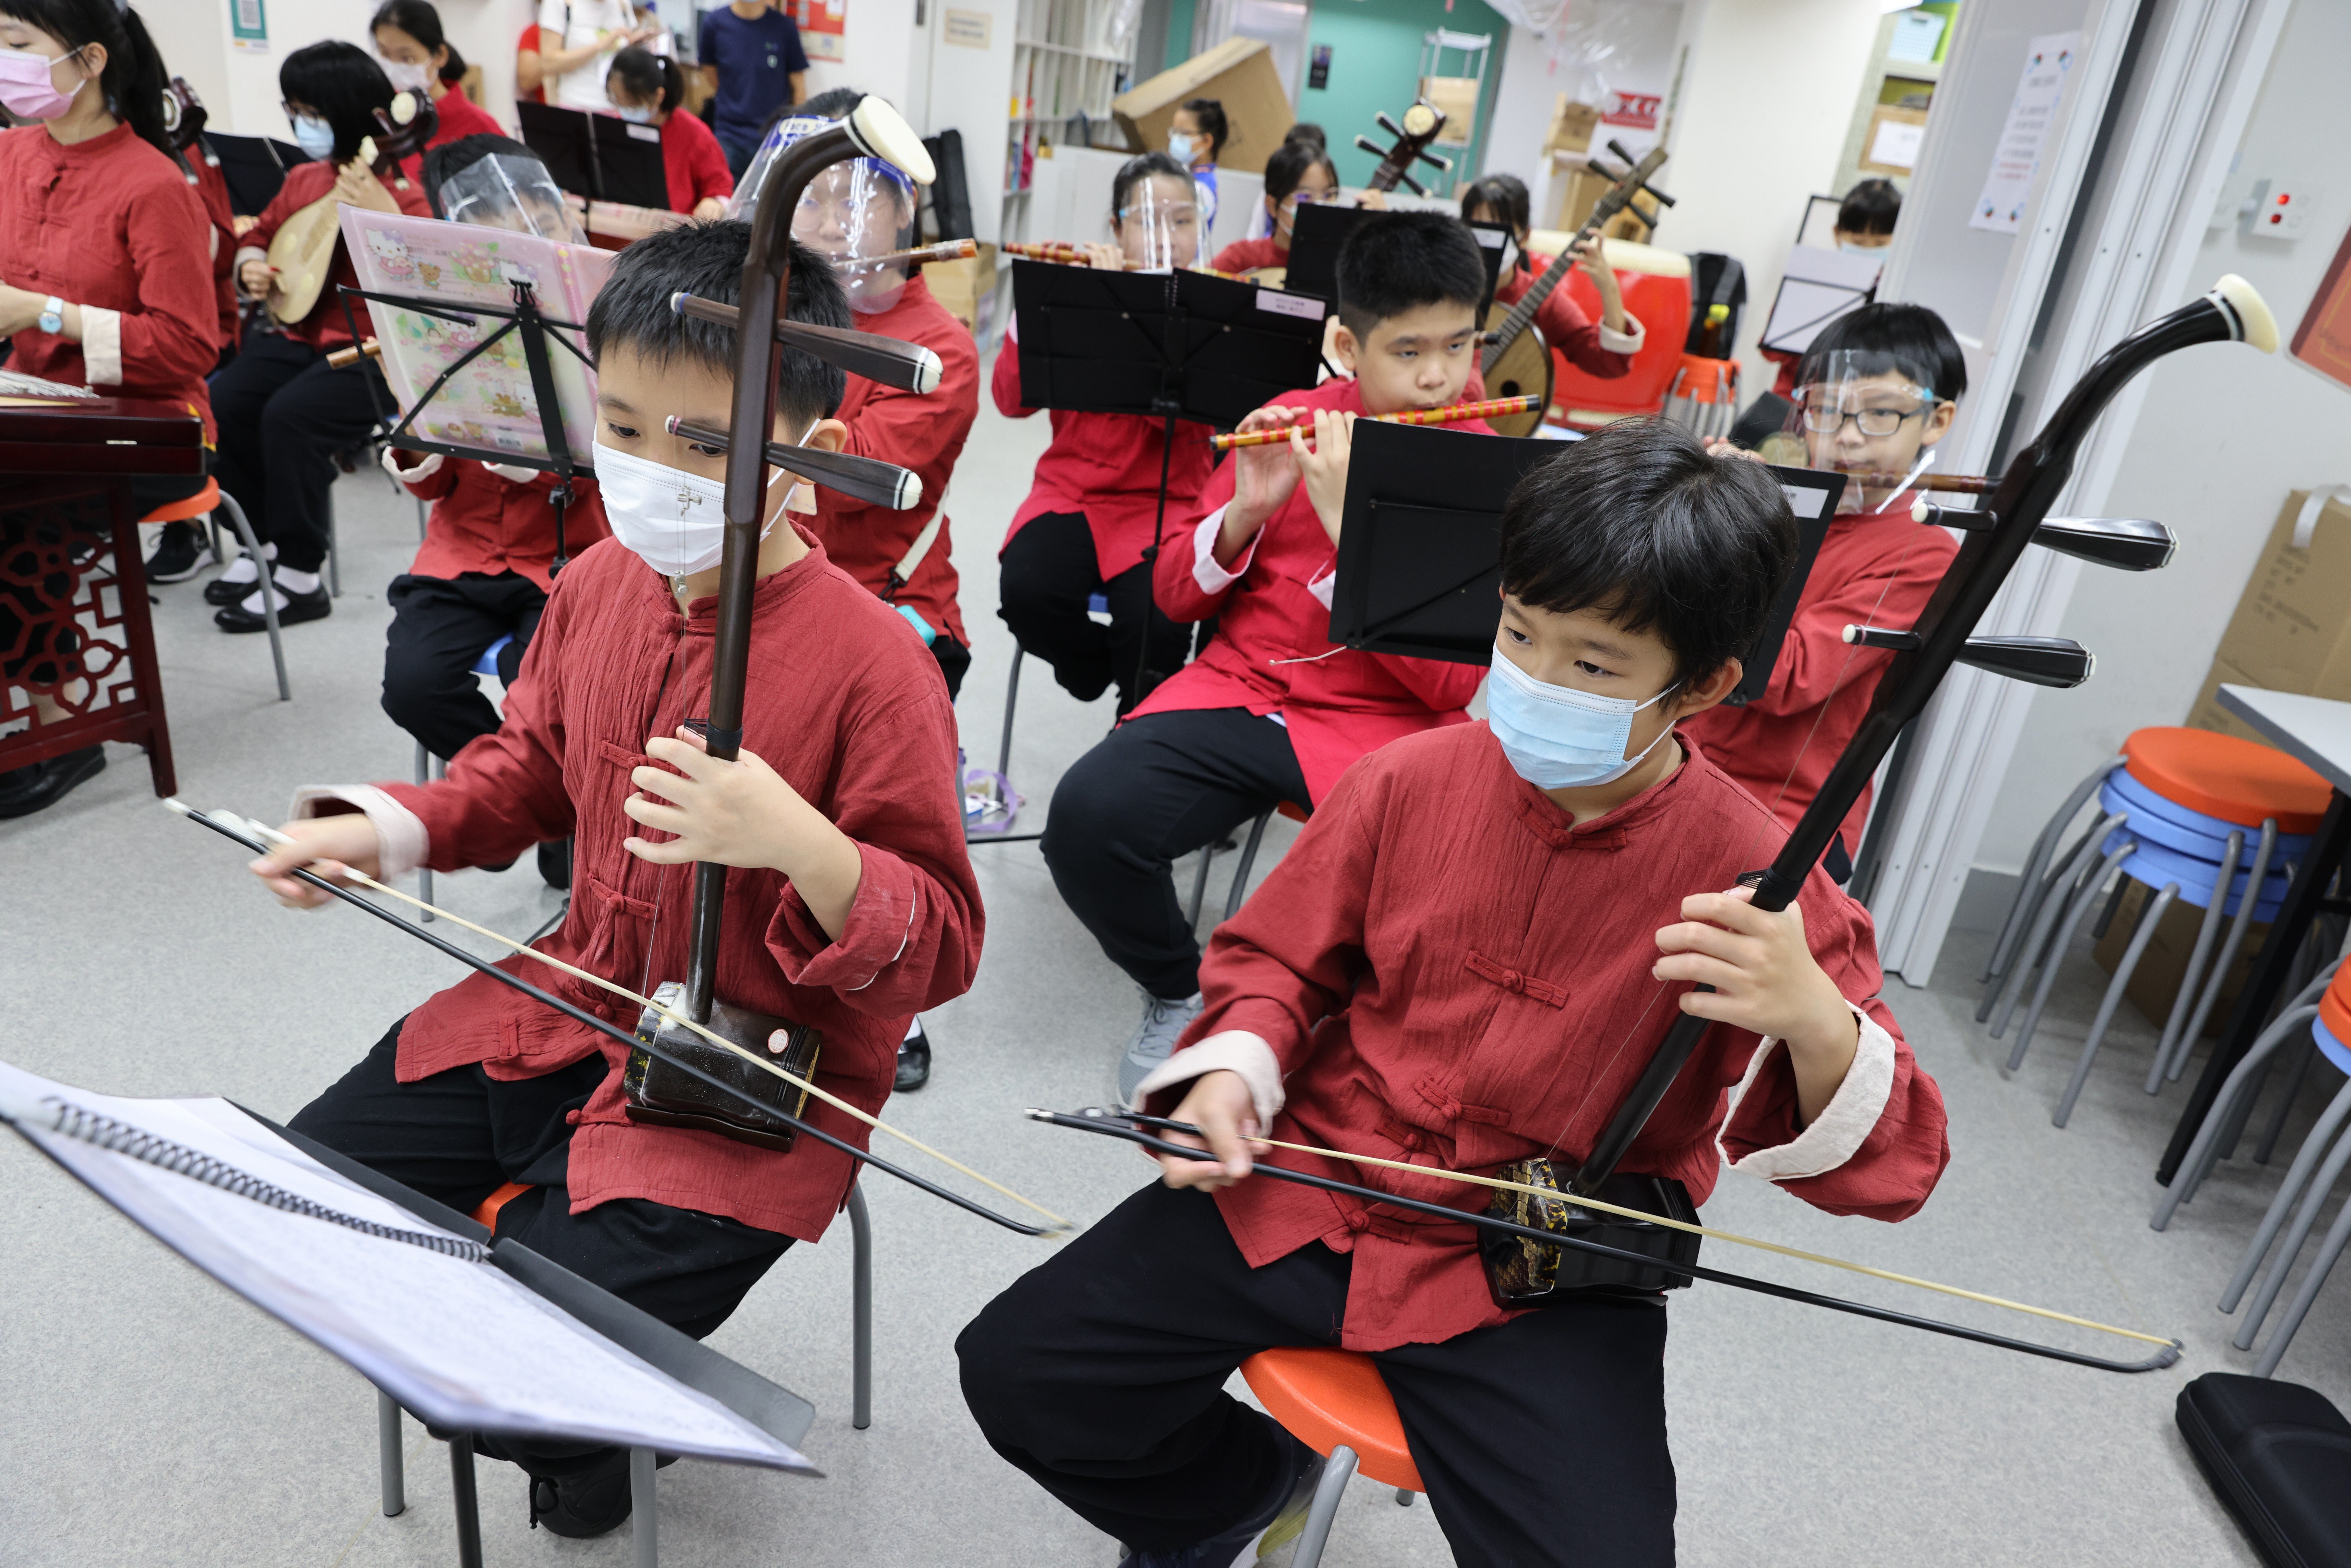 Children rehearse for a coming benefit concert being put on by the Society for Community Organisation. Photo: May Tse